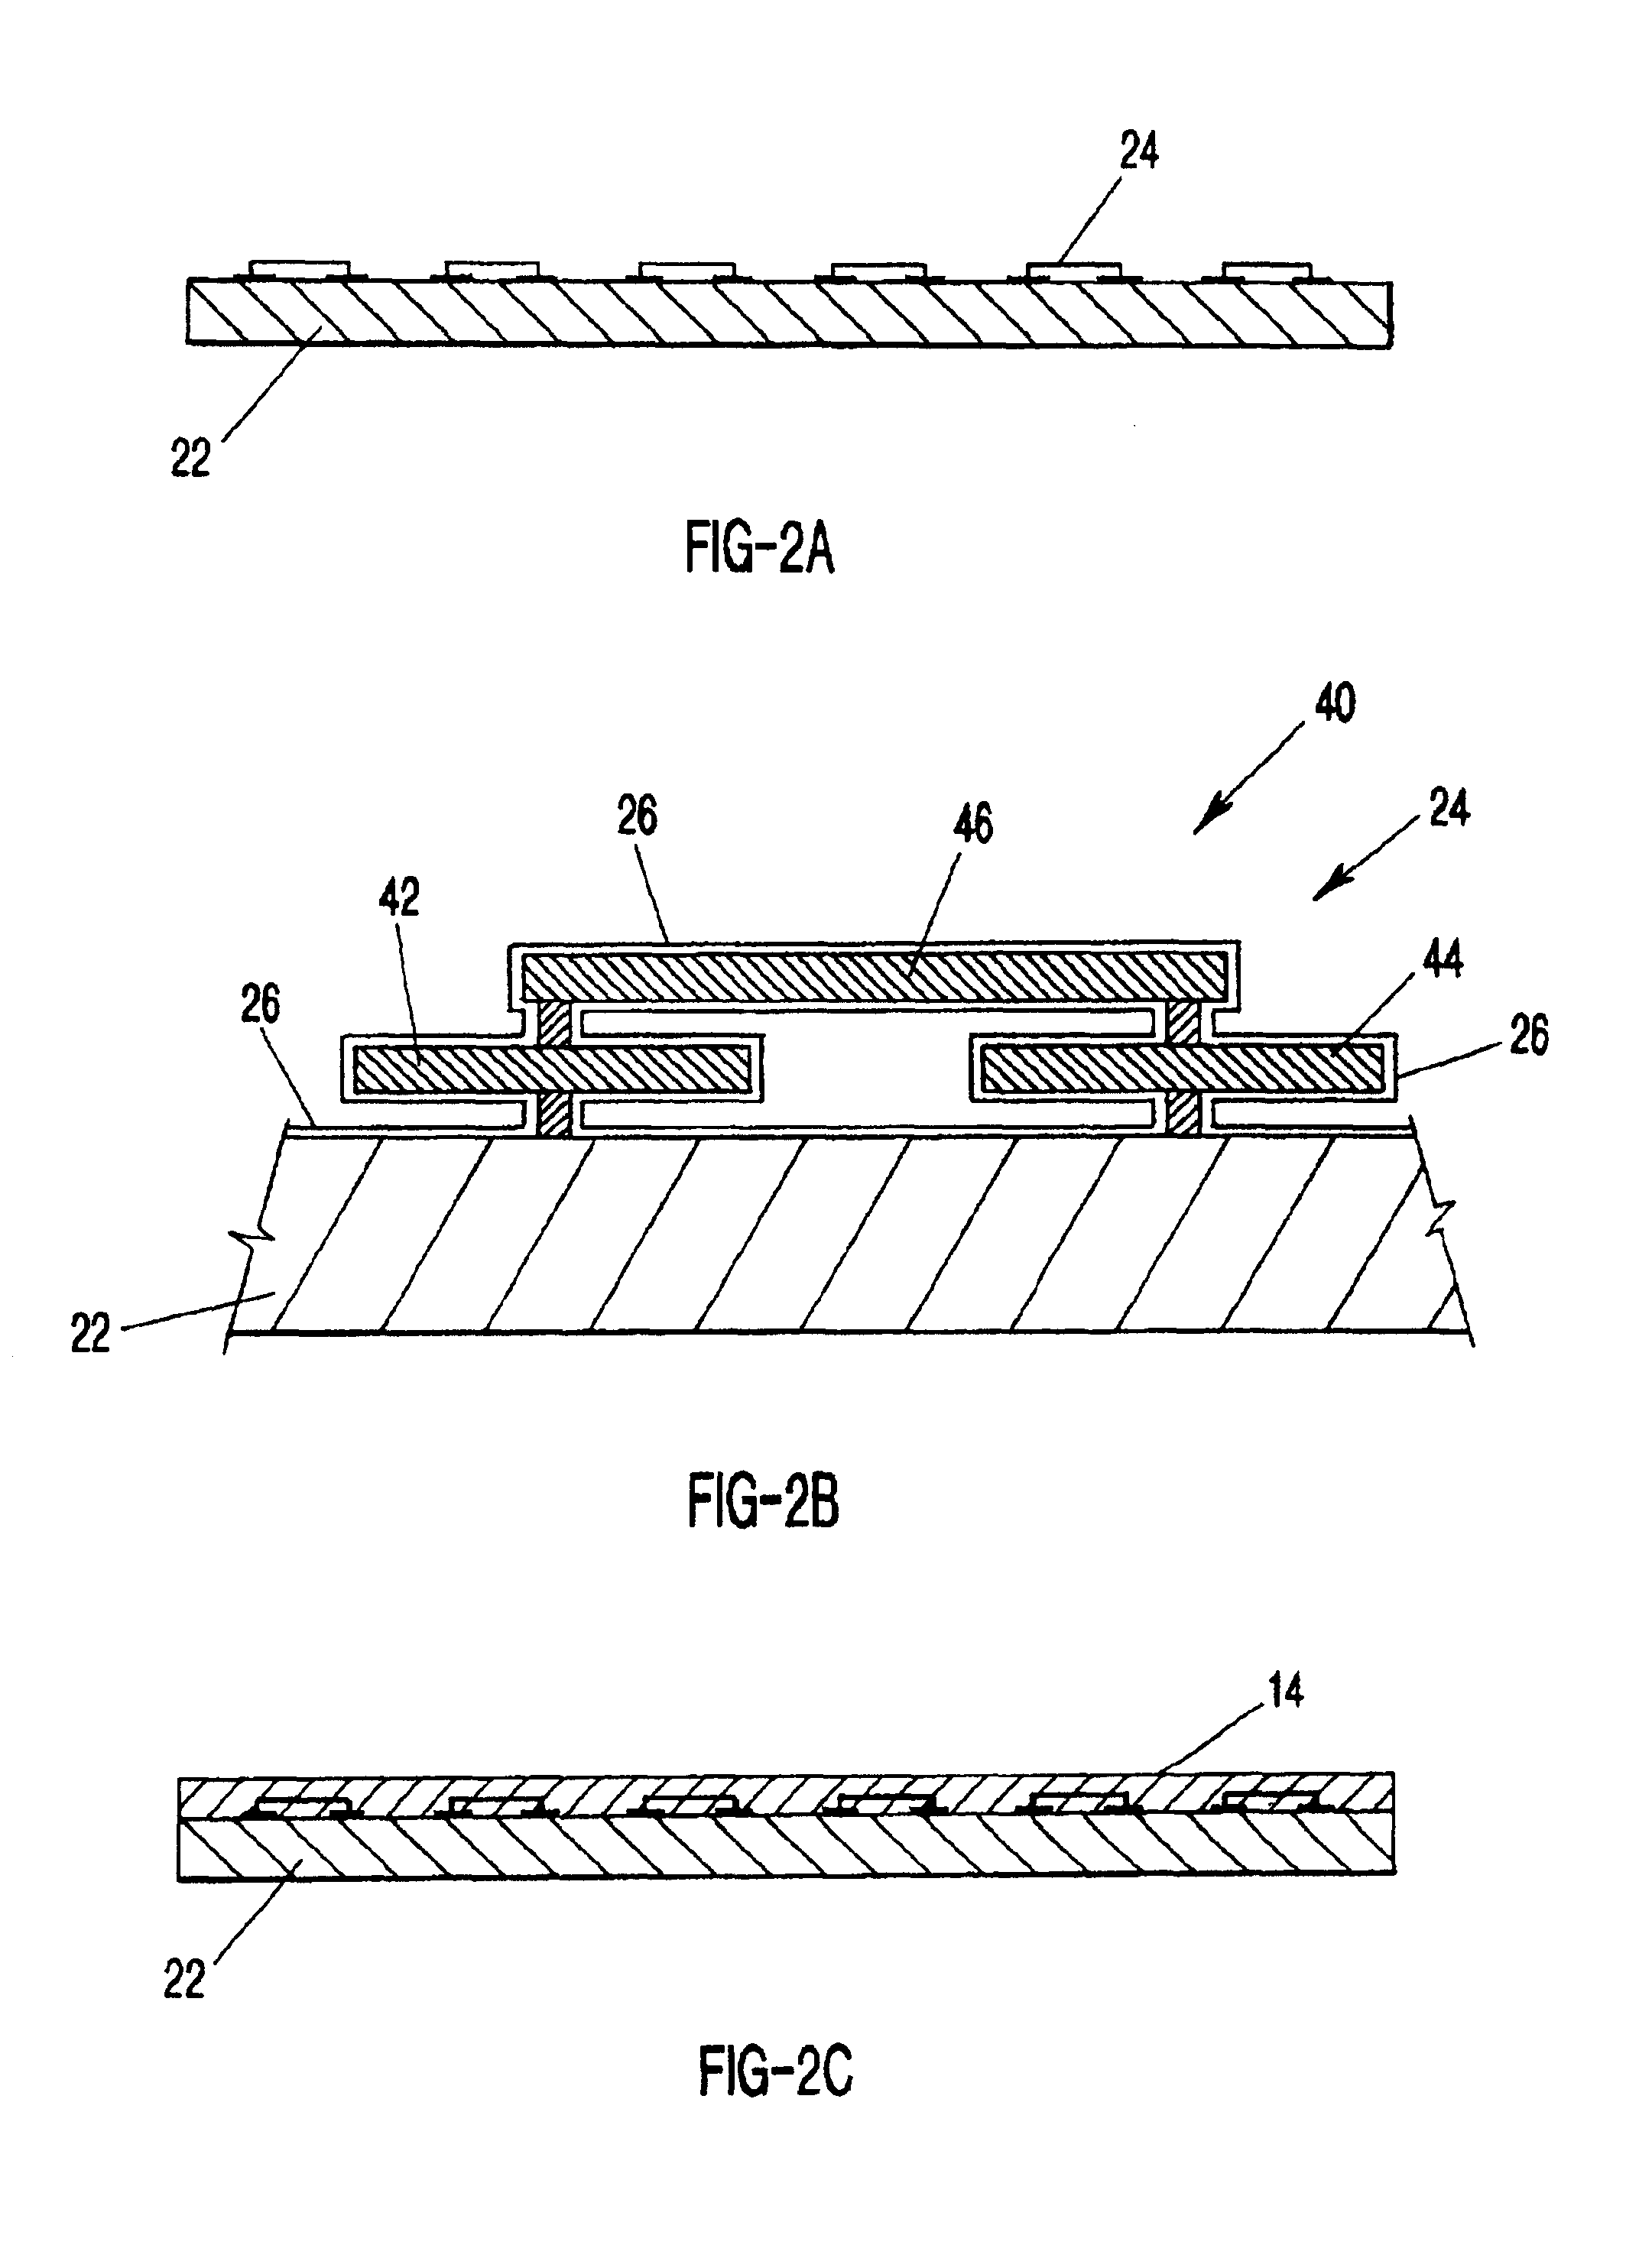 Temporary coatings for protection of microelectronic devices during packaging